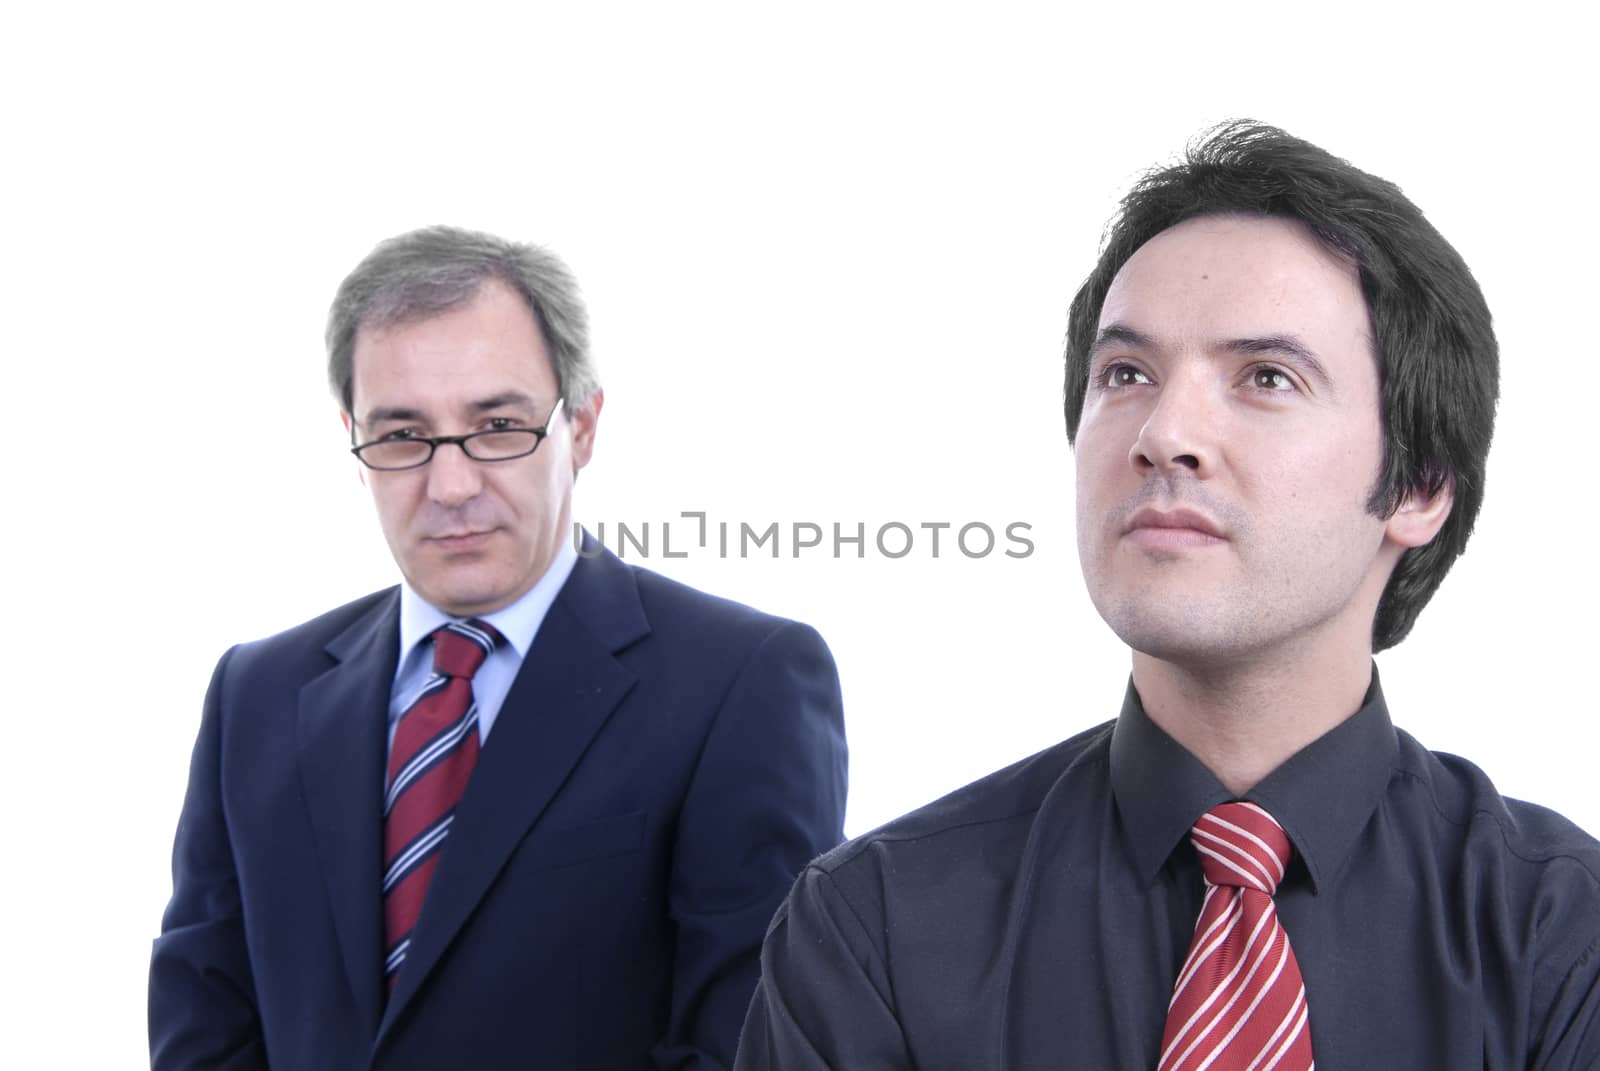 two business men portrait on white. focus on the right man